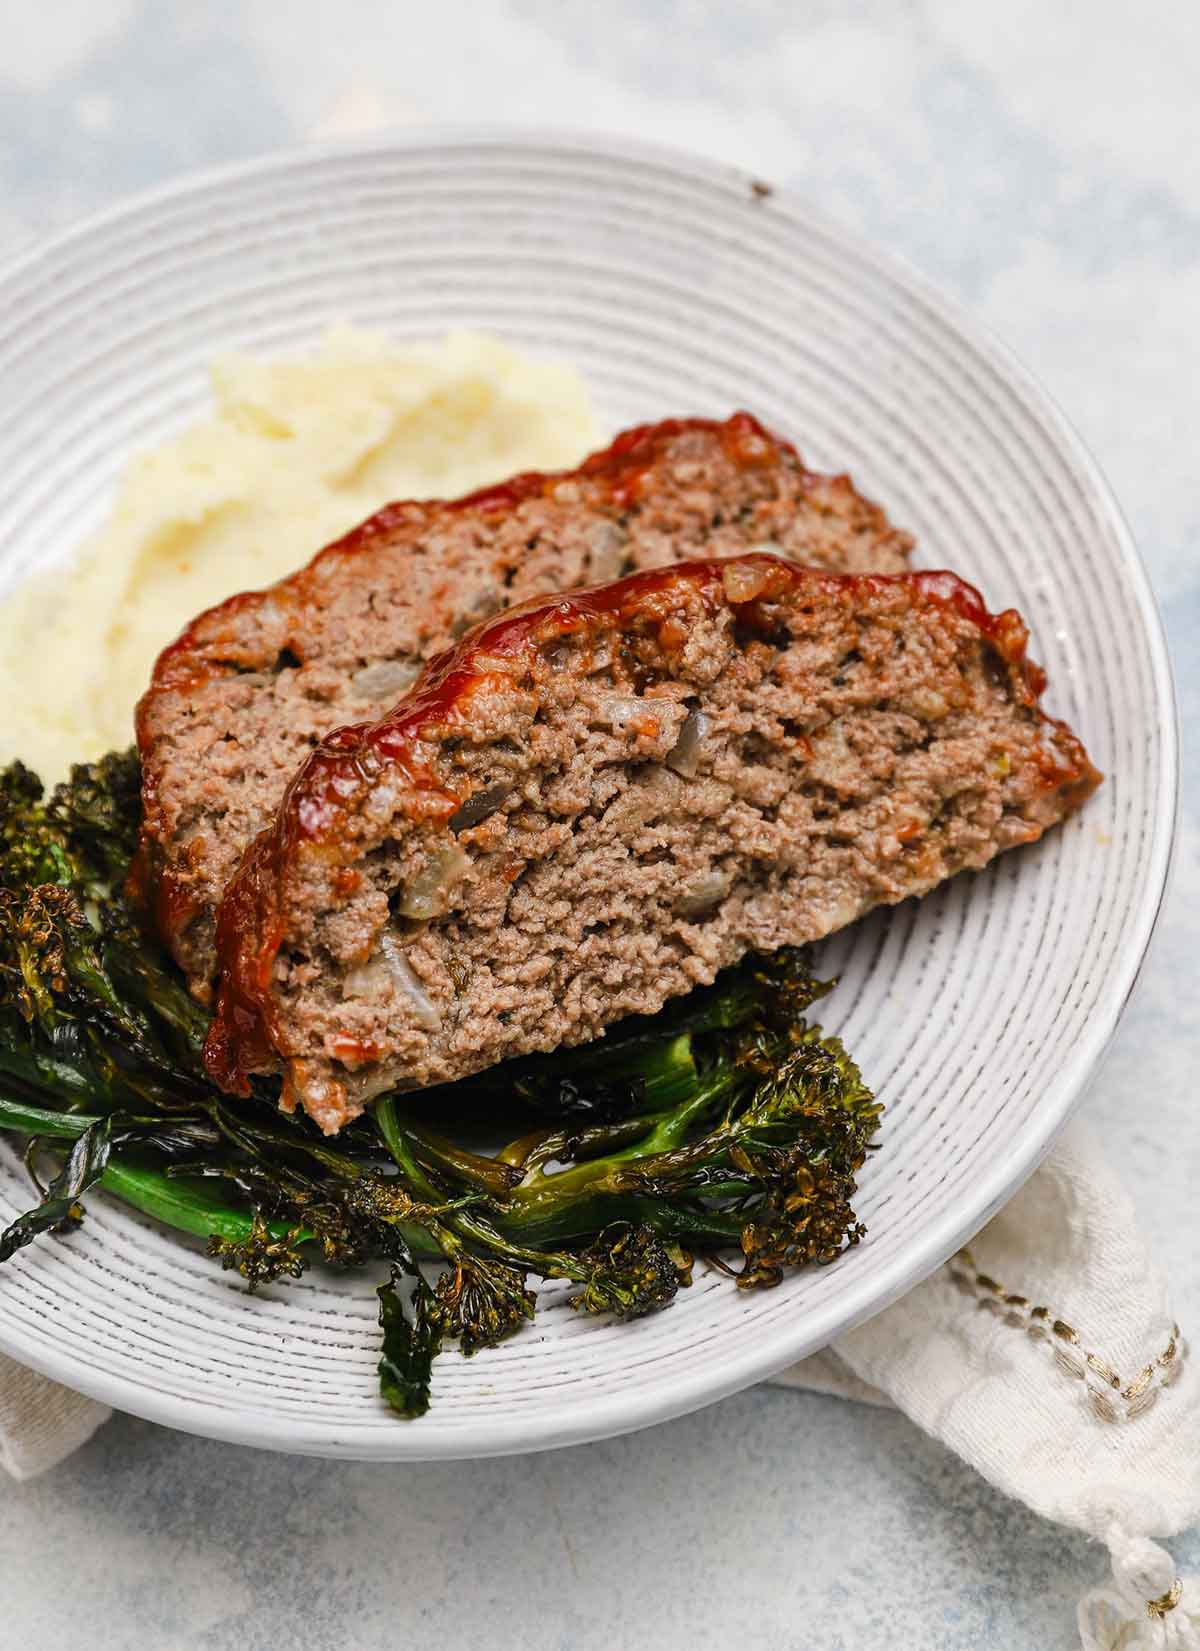 Two slices of meatloaf on a plate atop a pile of mashed potatoes and roasted broccolini.